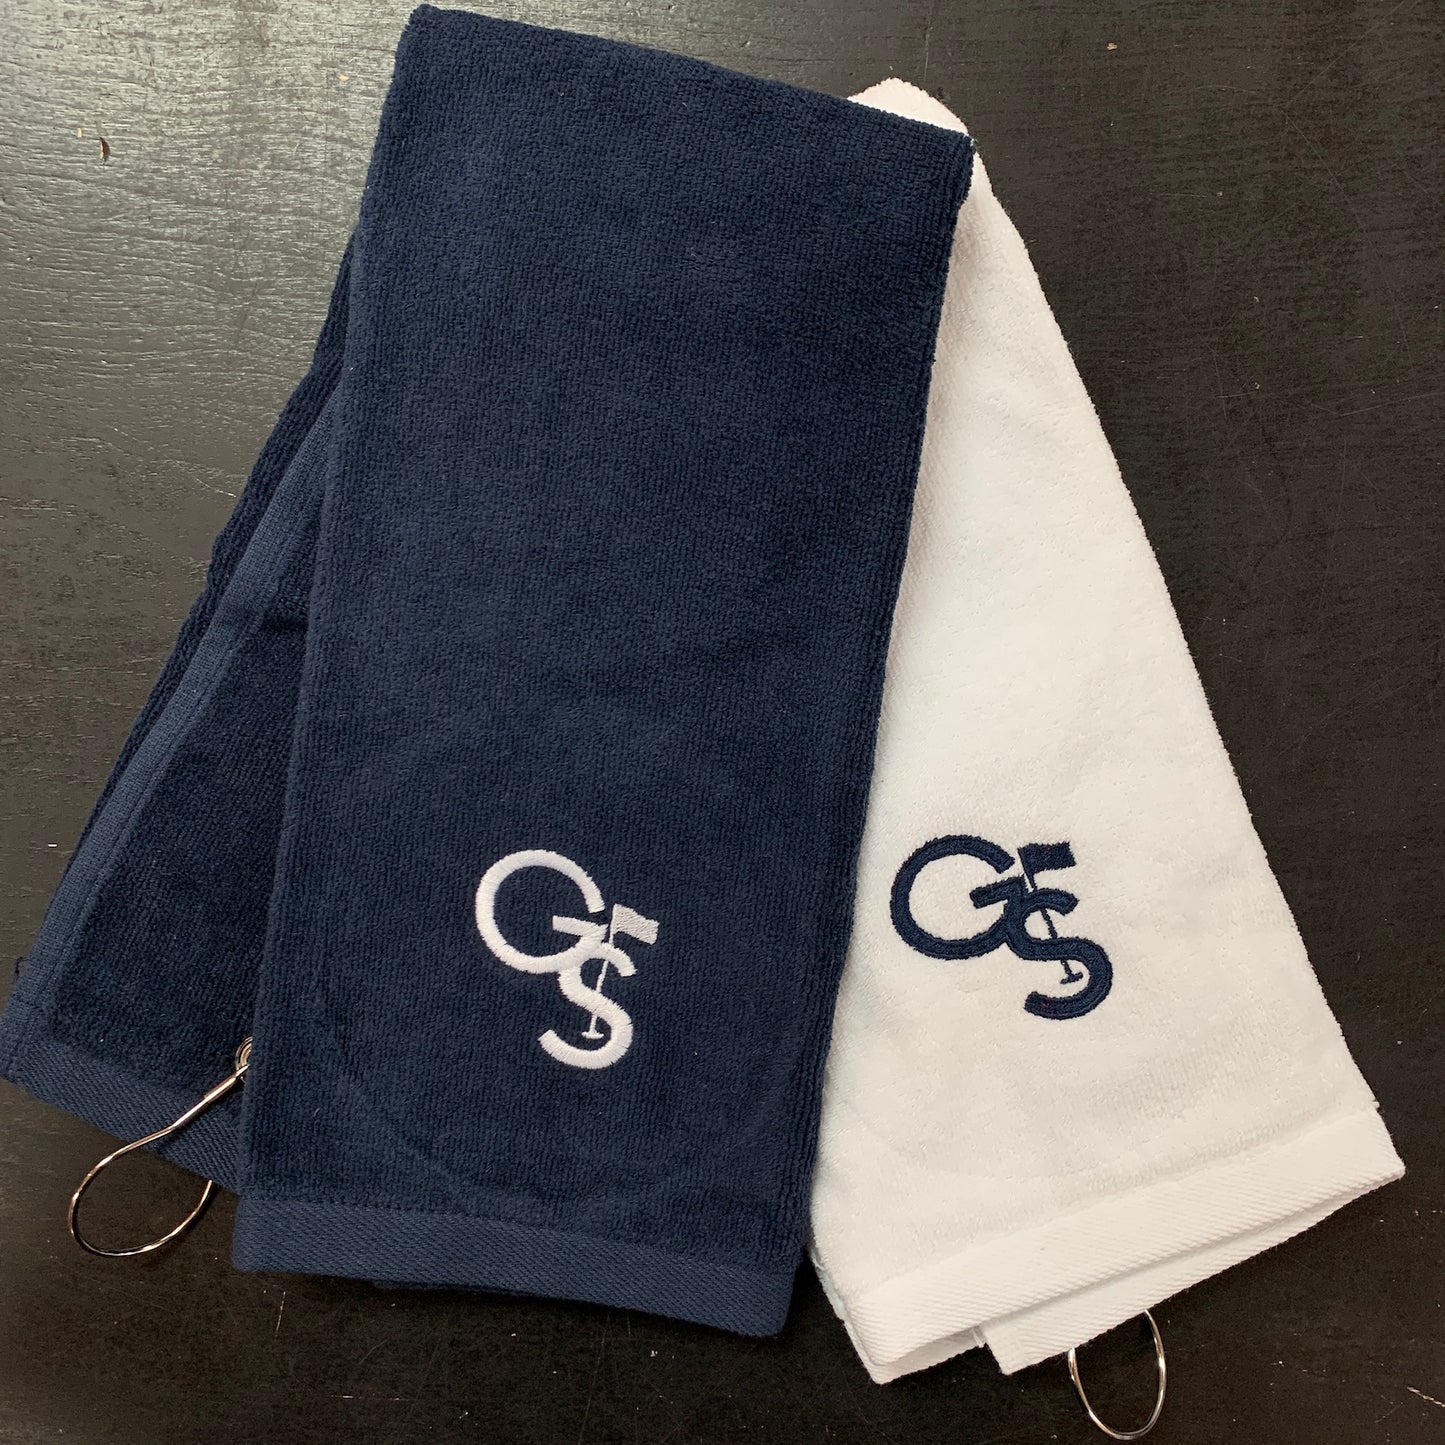 GS Golf Towel - Navy and White